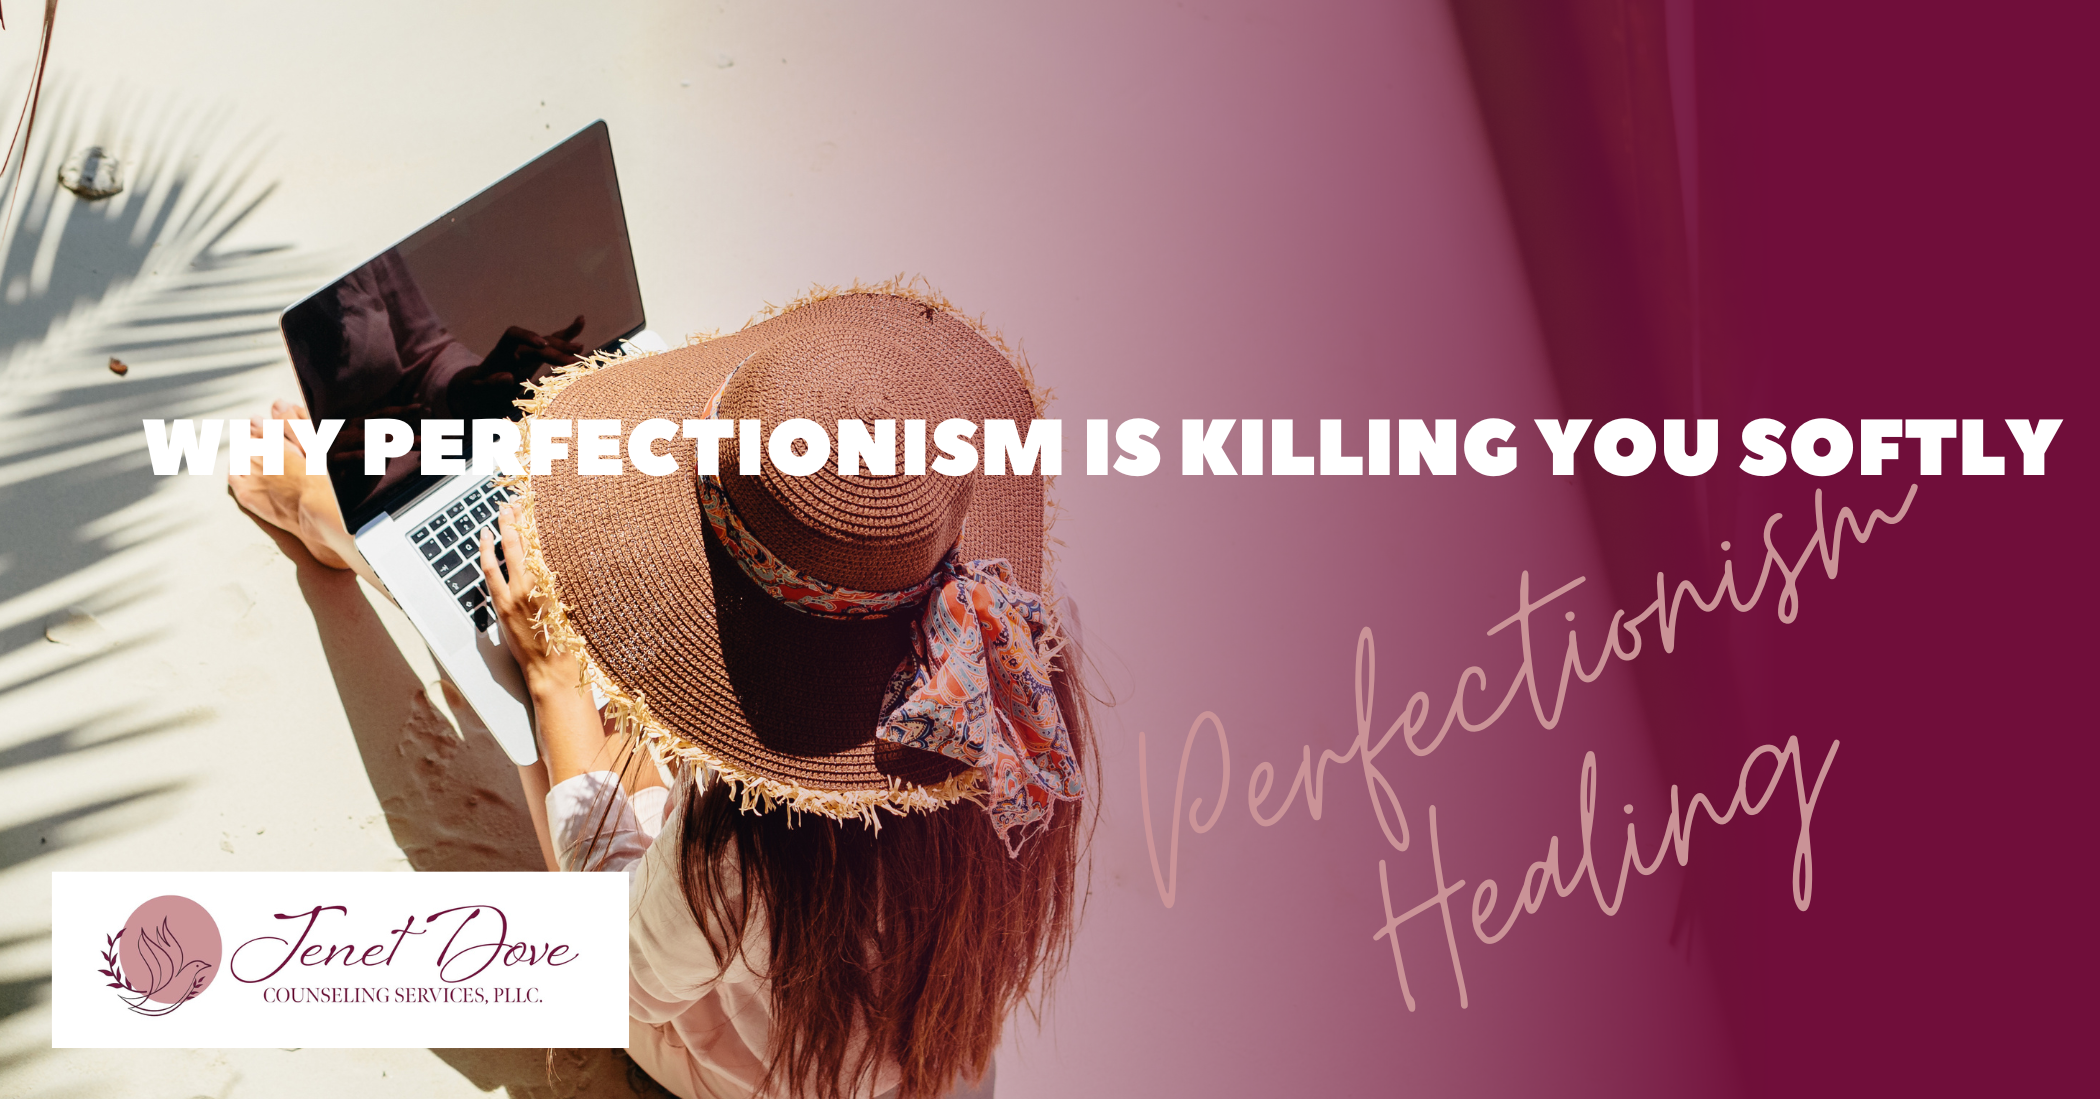 Why Perfectionism is Killing You Softly